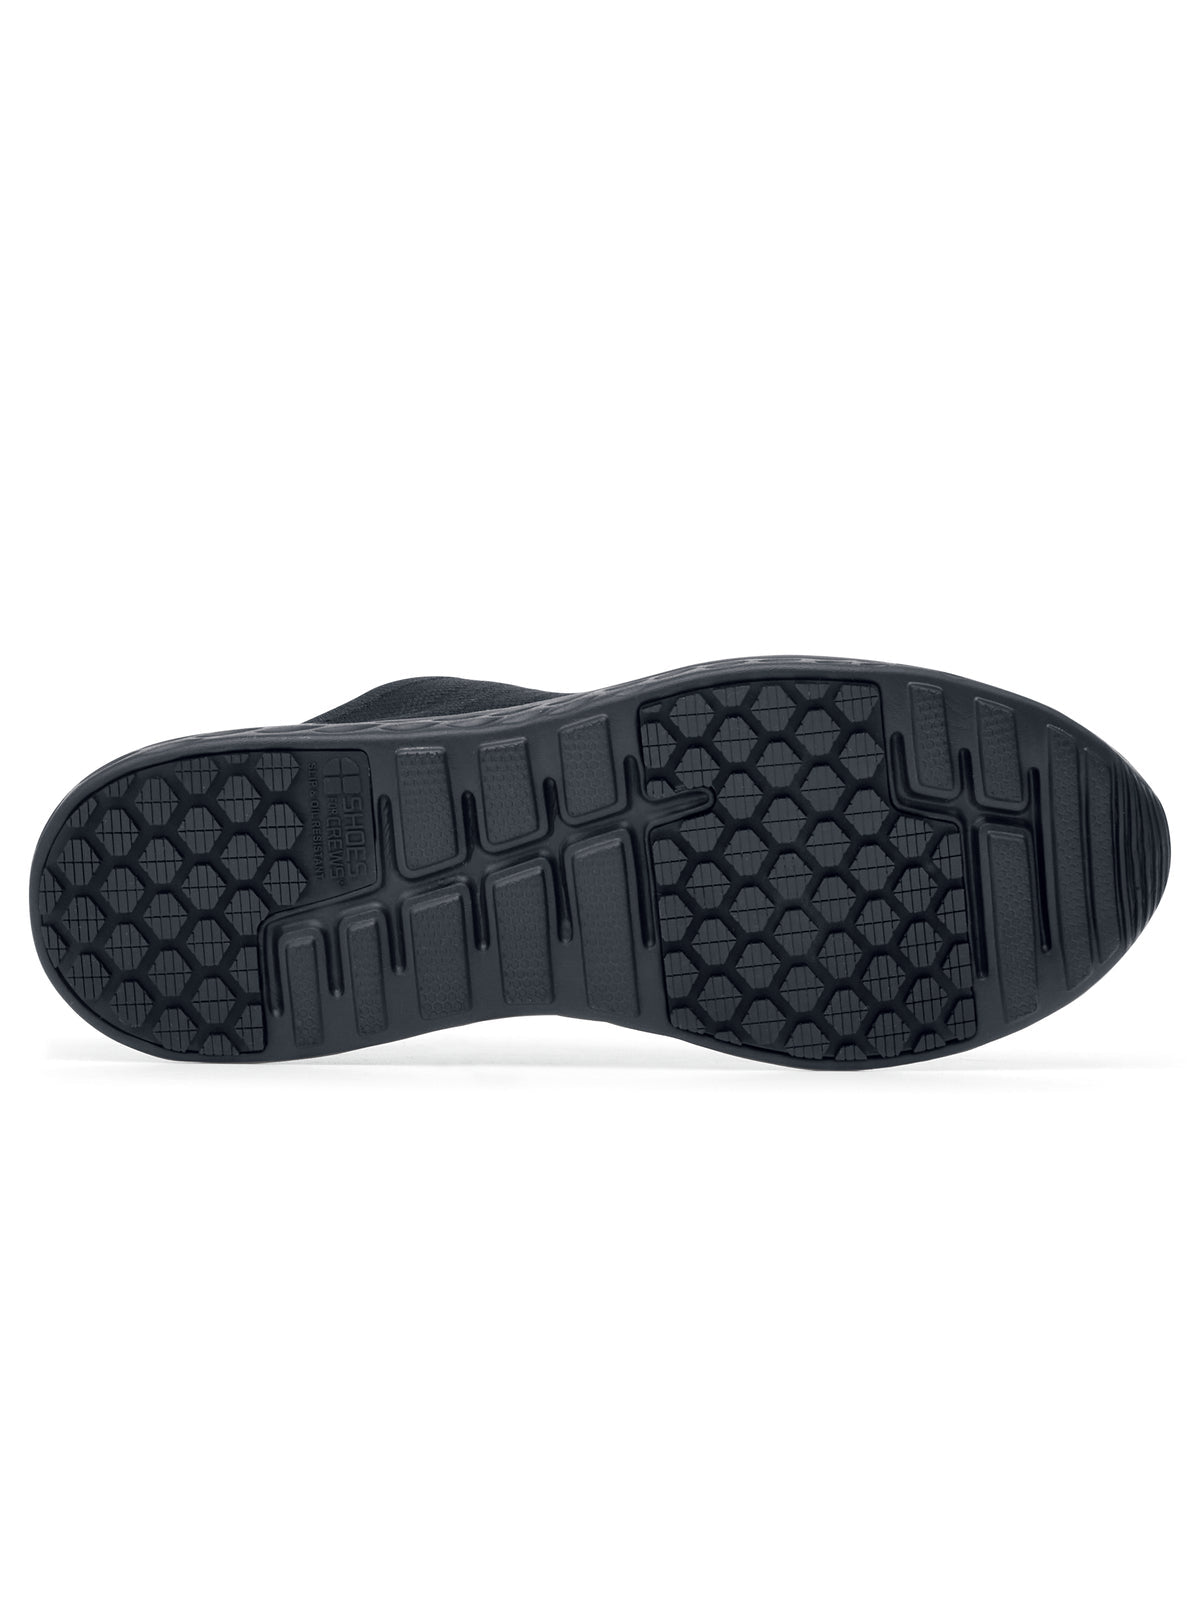 Men's Work Shoe Everlight Black by  Shoes For Crews.